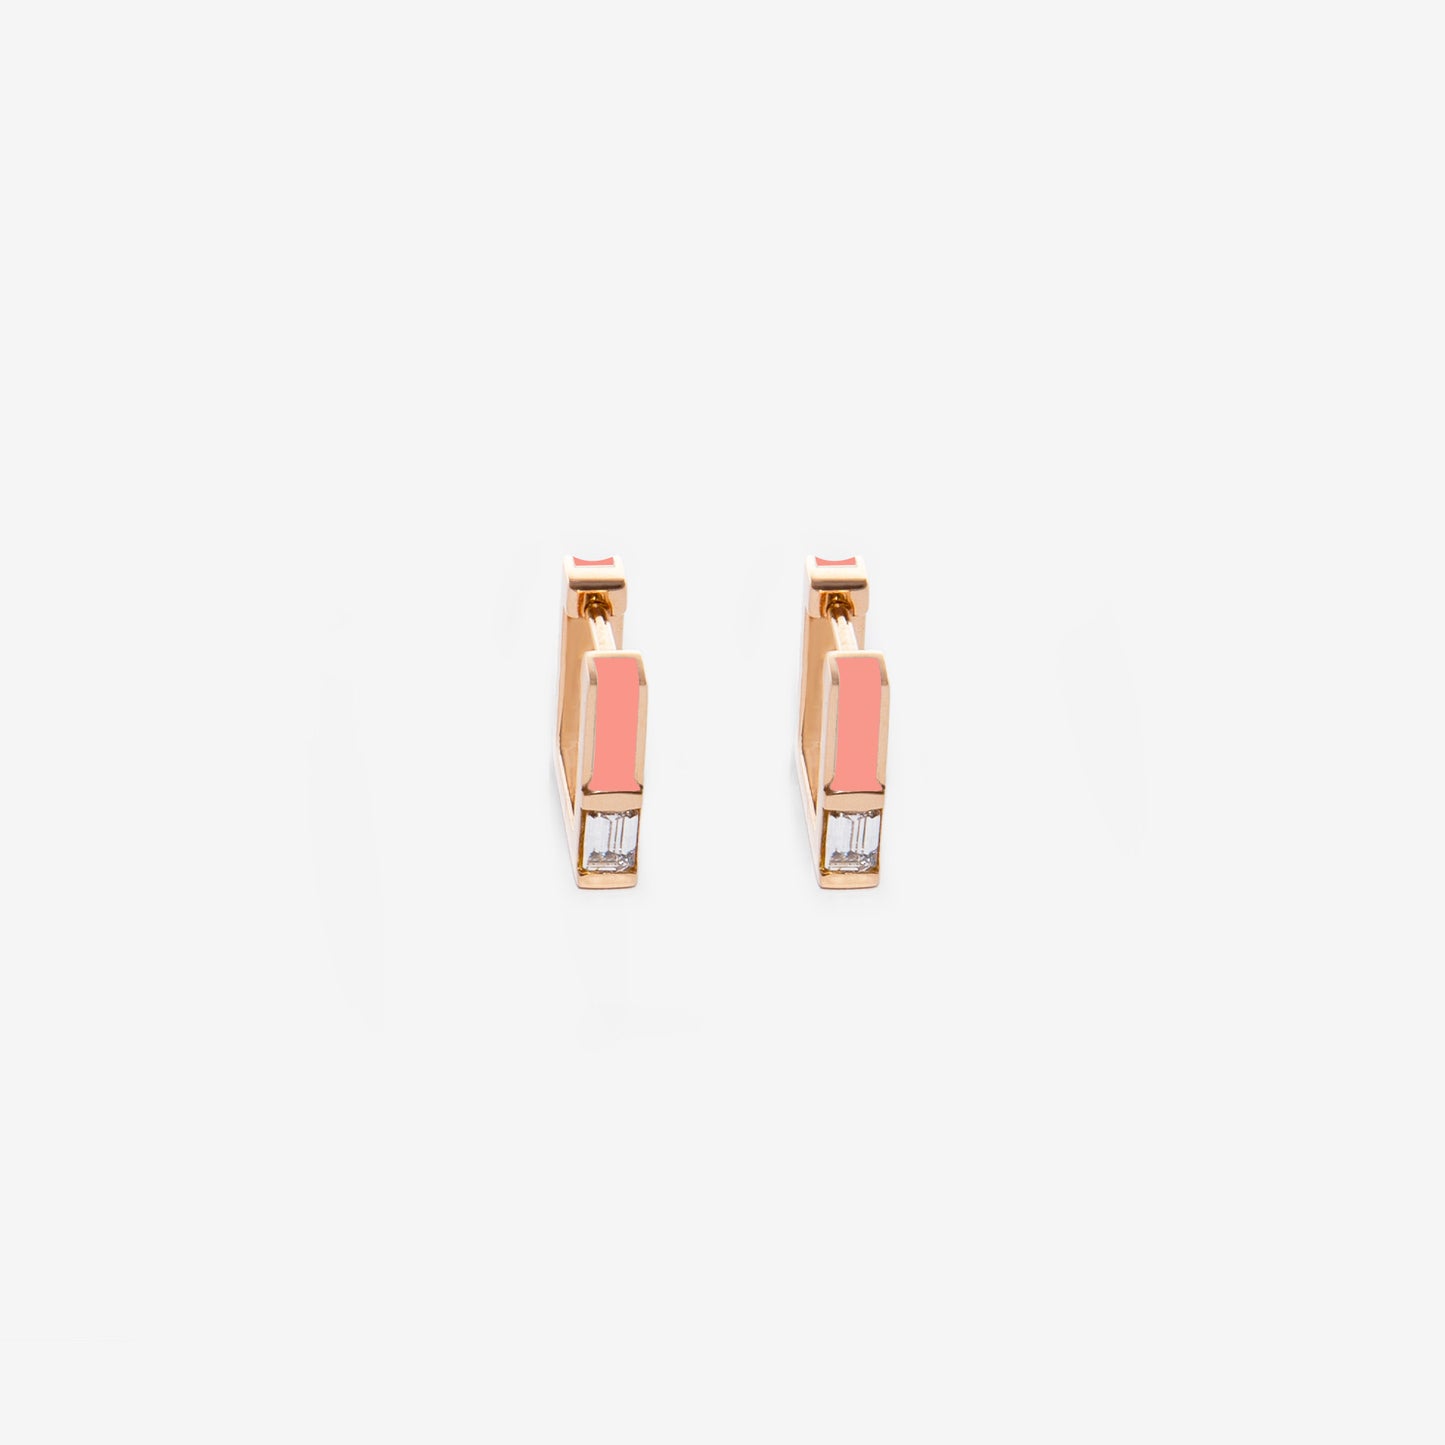 Square salmon pink earrings with diamonds